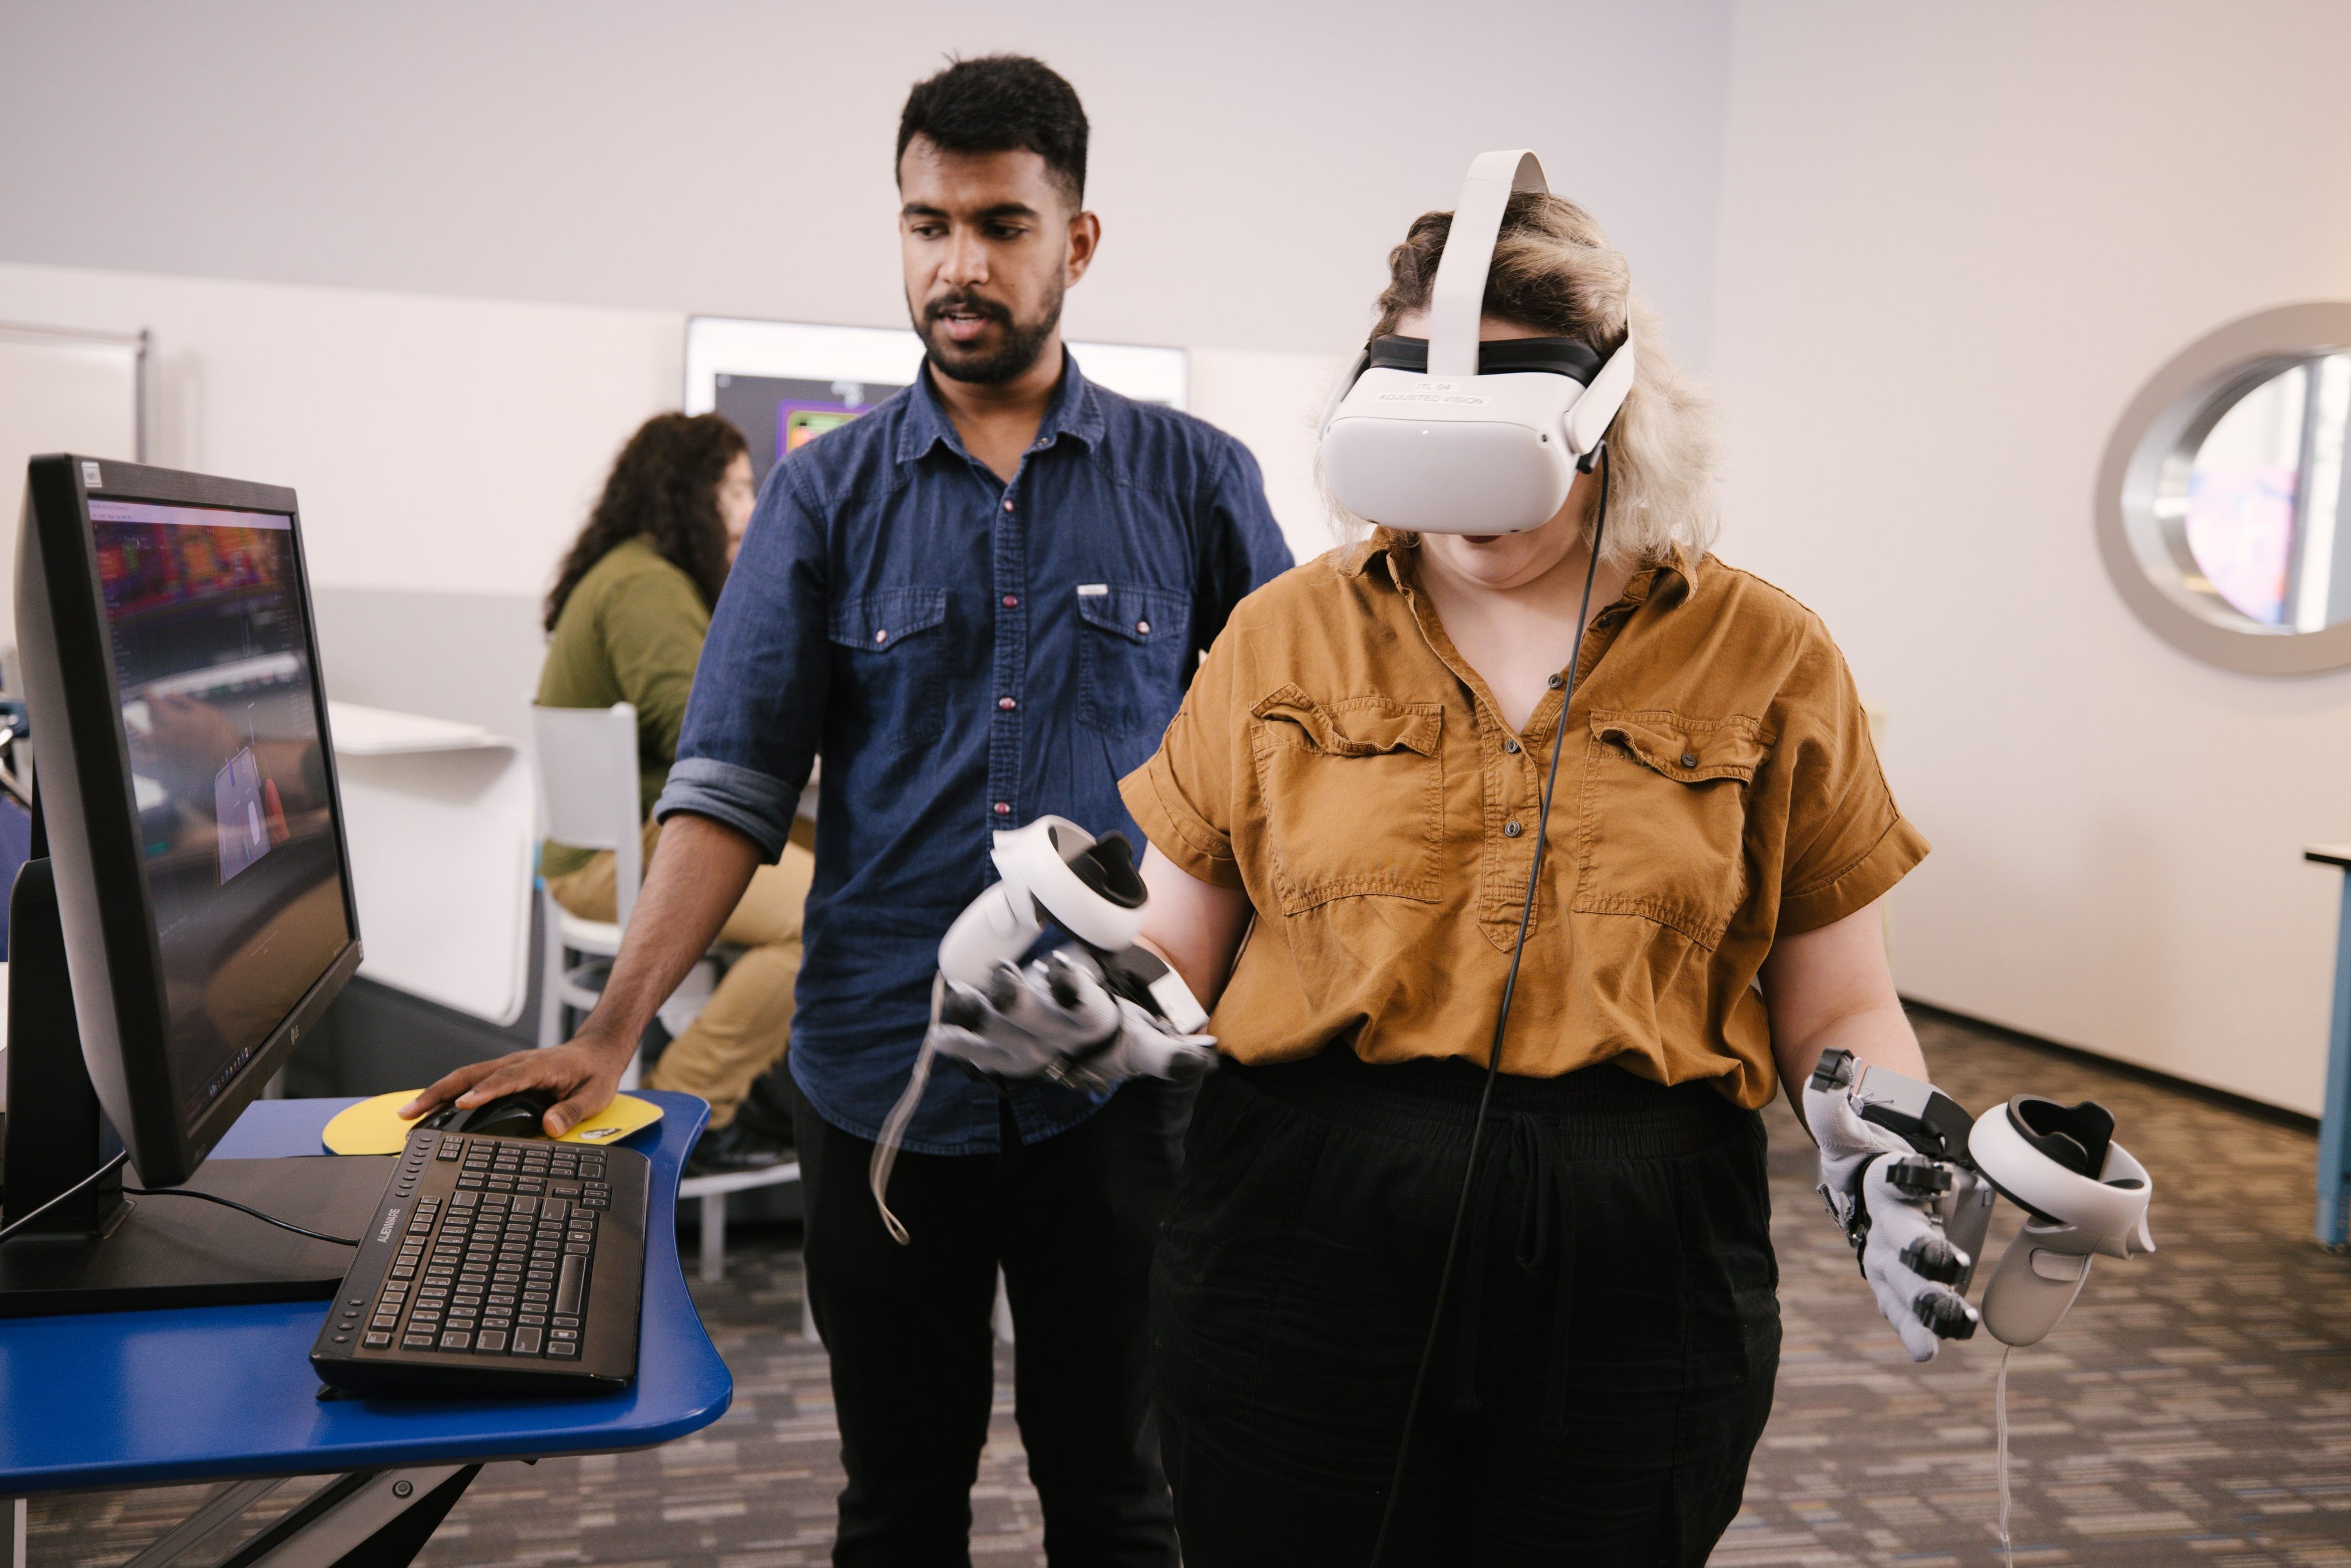 Emerging Technologies students work together within the Full Sail University Healthcare Technology Lab powered by Full Sail University